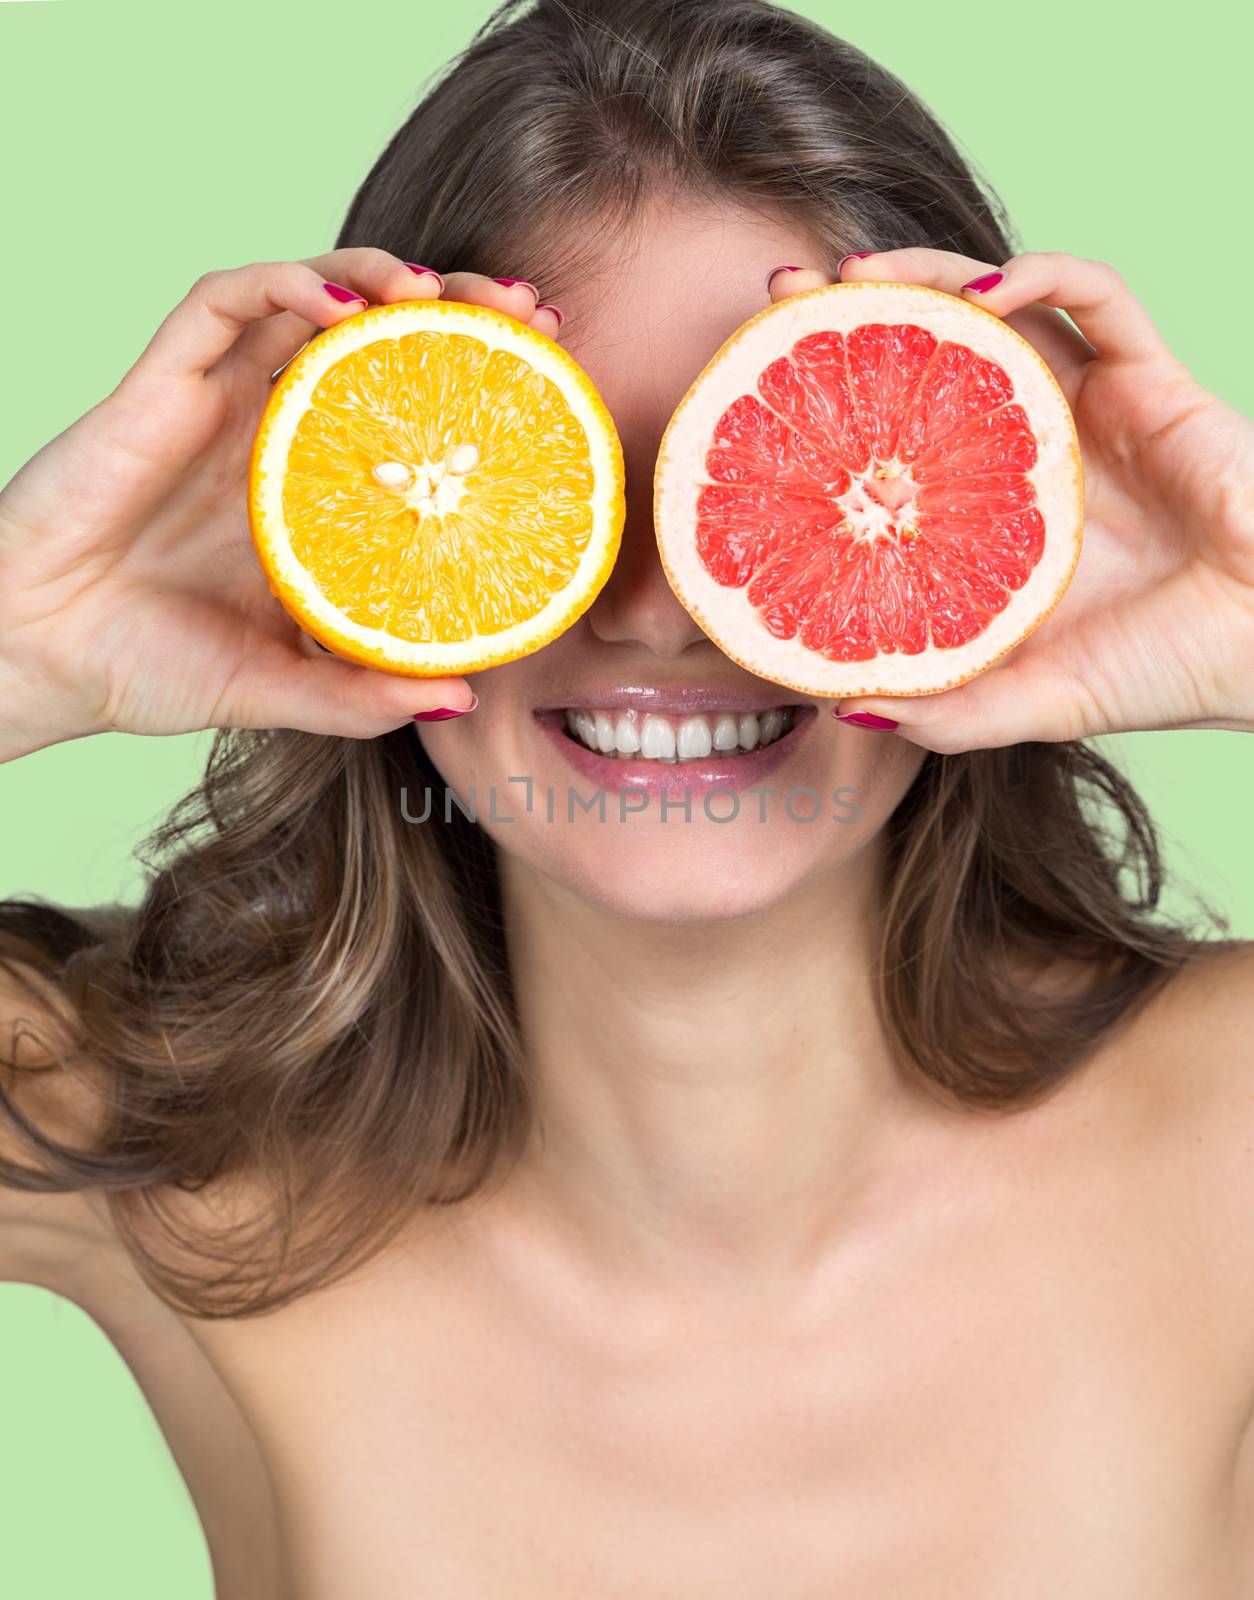 Smiling woman holding citrus slices by ALotOfPeople